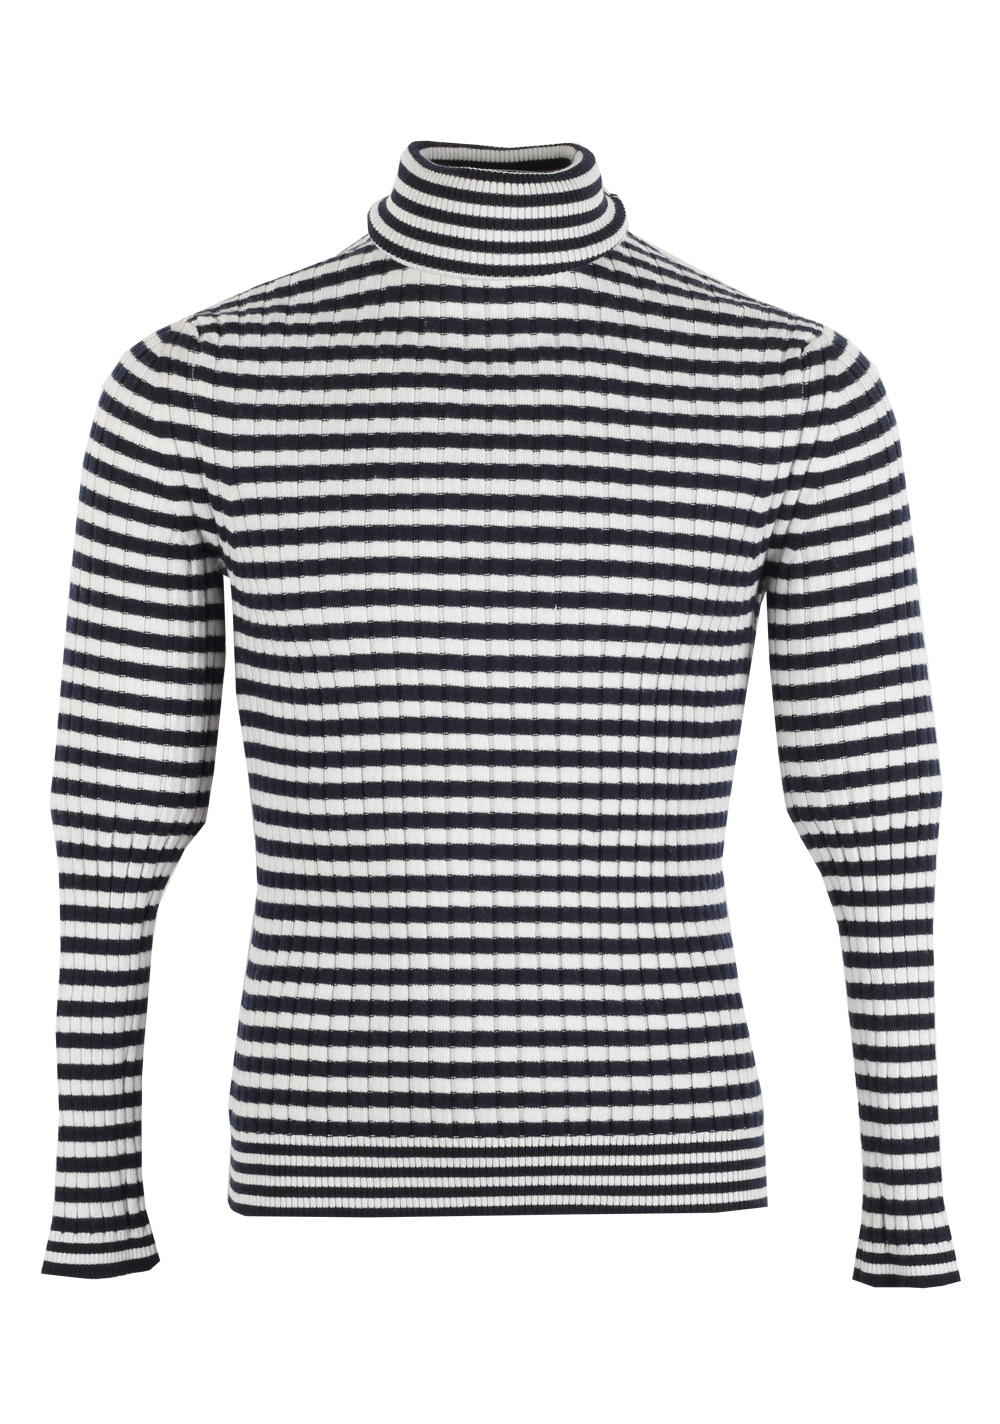 TOM FORD Blue White Turtleneck Sweater Size 48 / 38R U.S. In Cashmere Blend | Costume Limité